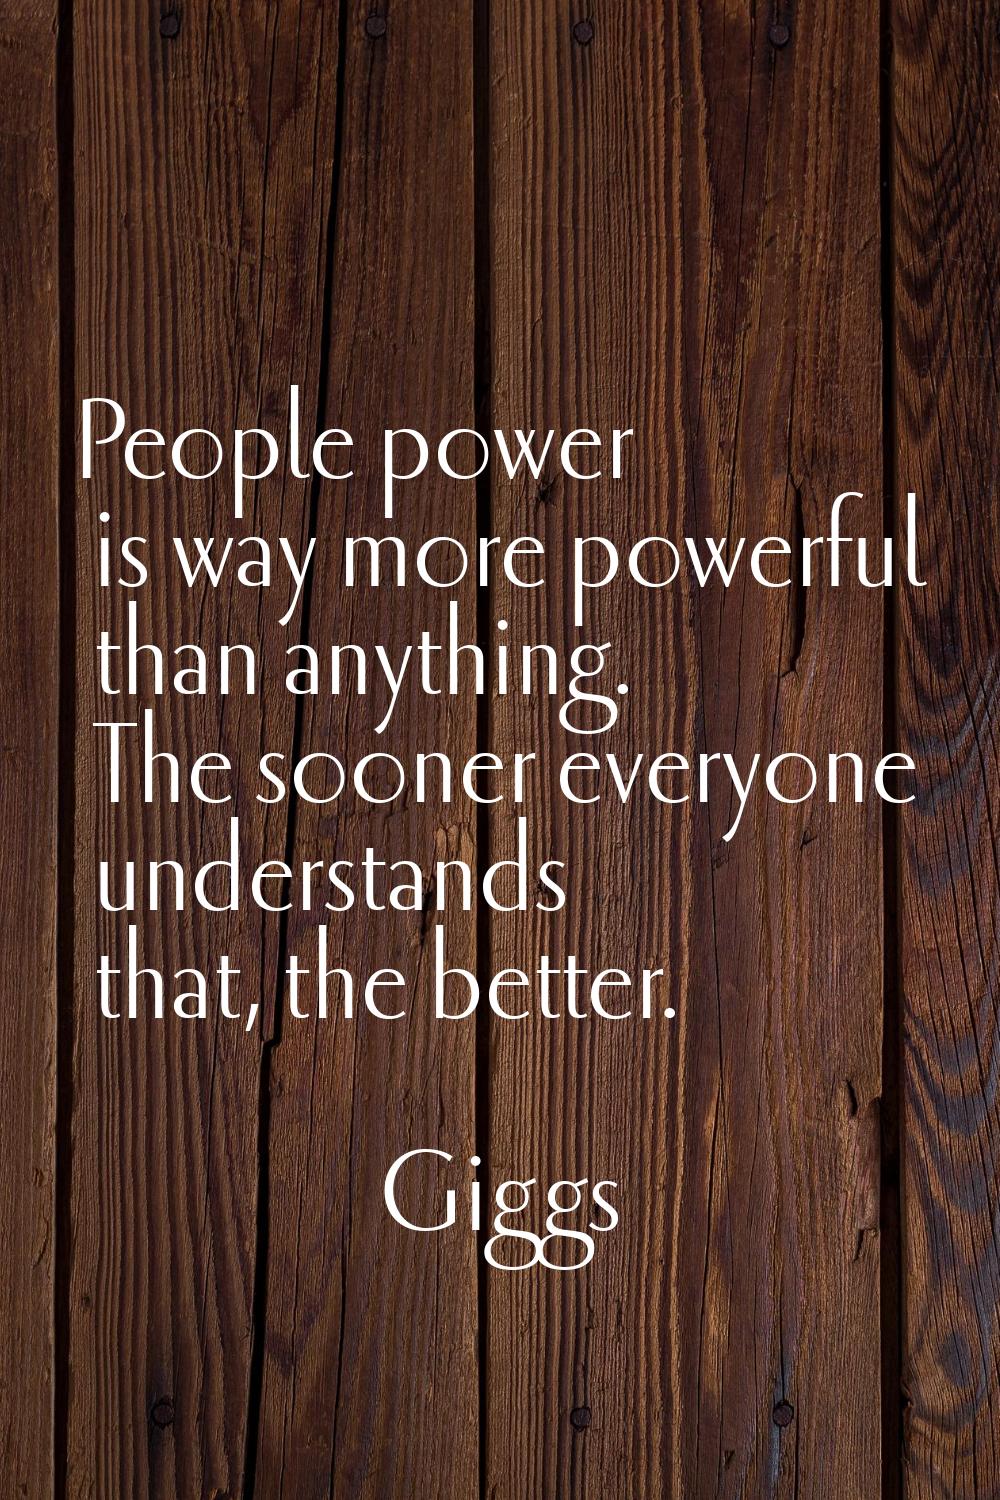 People power is way more powerful than anything. The sooner everyone understands that, the better.